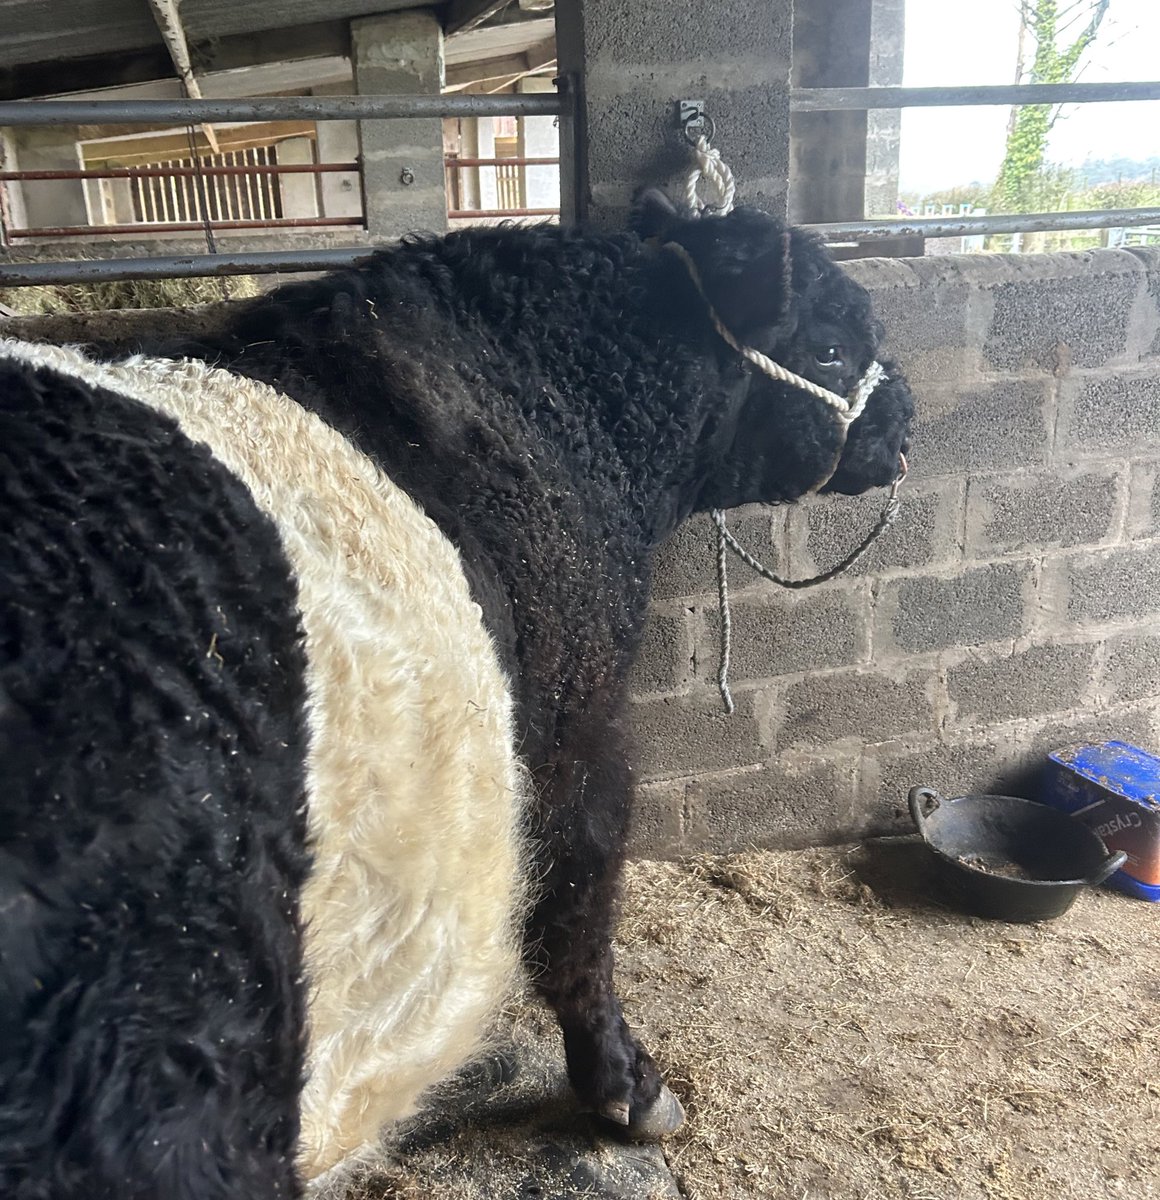 Busy morning with the Belties! Blood samples for BVD testing ✅ Castrations (+ pain relief) ✅ Pregnancy checks (All in calf 😁) ✅ Replacing ear tags ✅ Day three of halter breaking calves ✅ Mum has been saving up tasks for me coming home 😂🤣🐮.